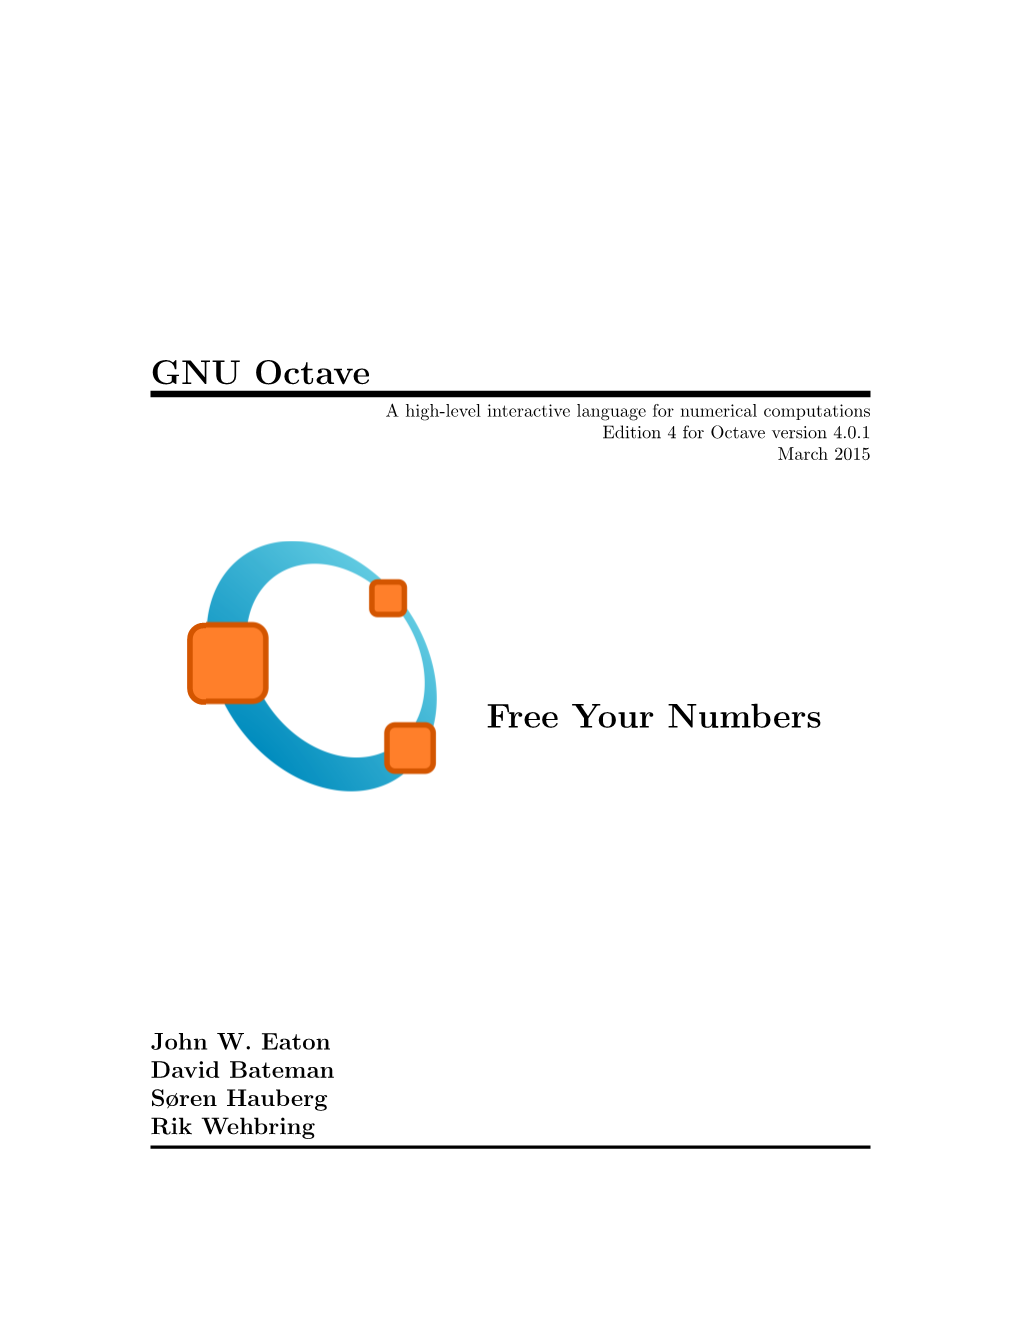 GNU Octave Free Your Numbers